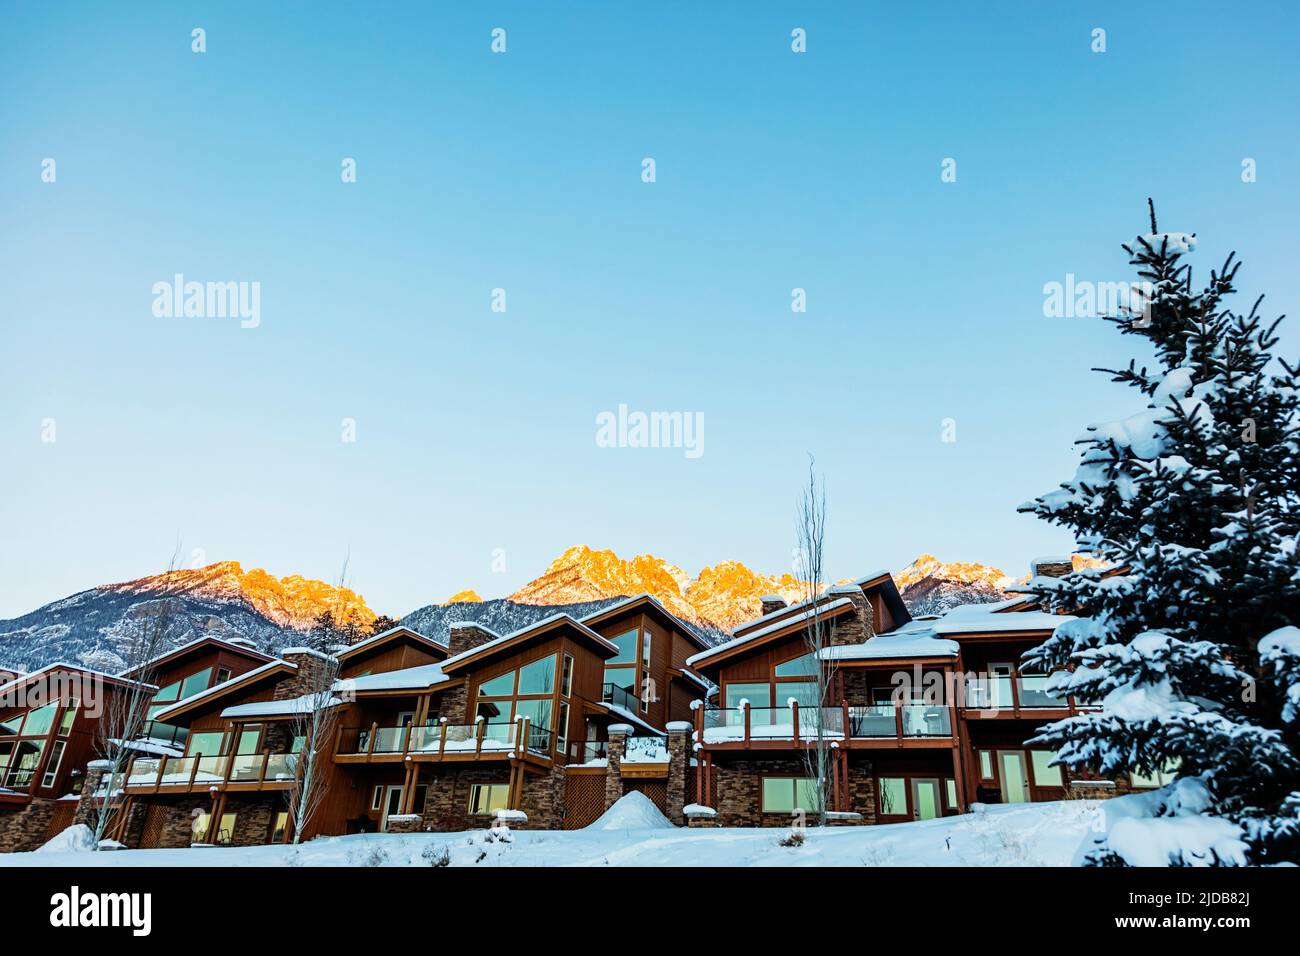 A view of condominiums at Fairmont Hot Springs, a popular resort town: Fairmont Hot Springs, BC, Canada Stock Photo